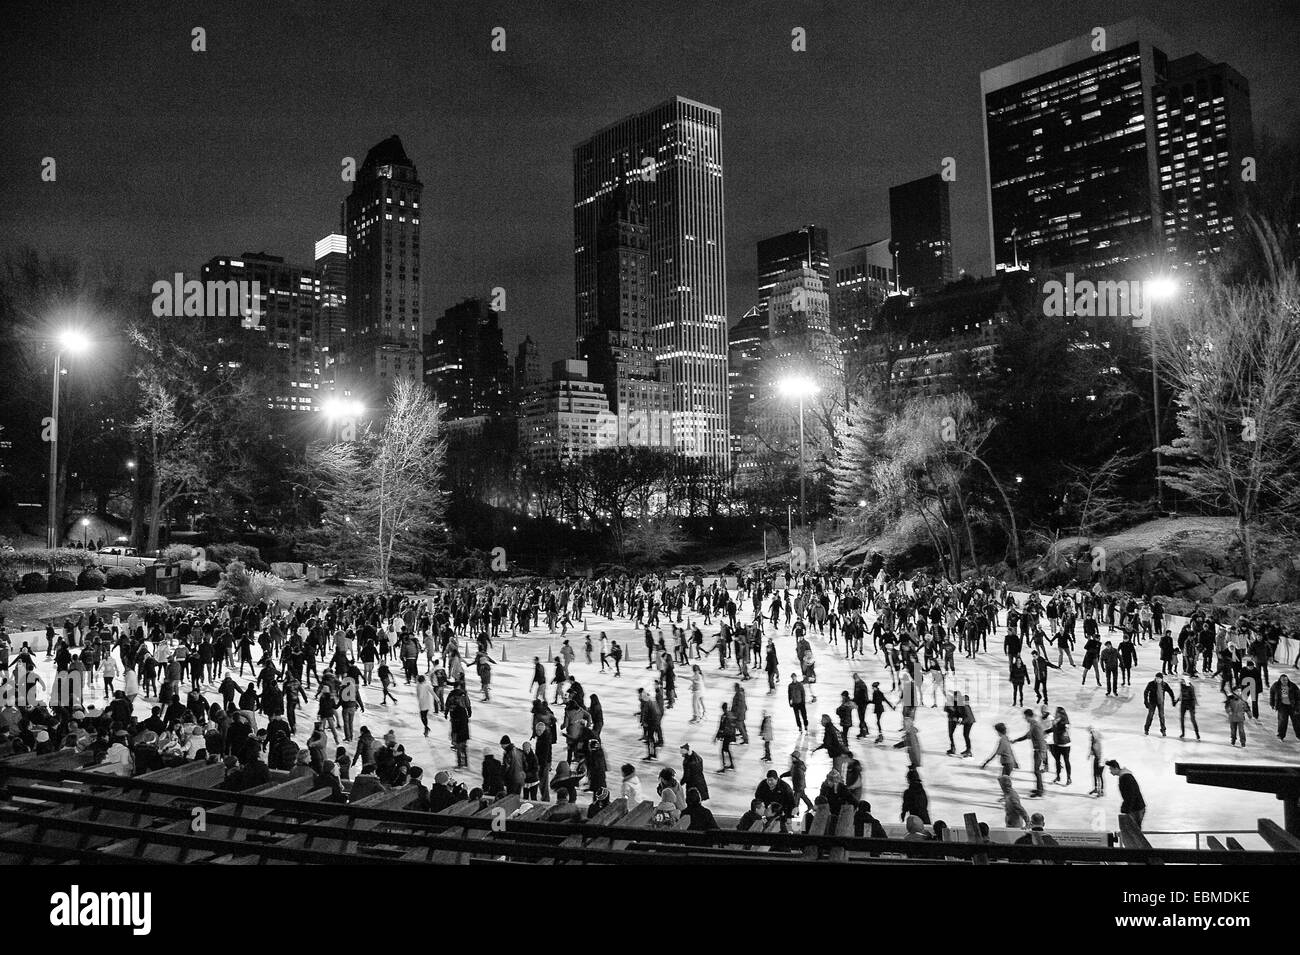 Central park wollman ice rink Black and White Stock Photos & Images - Alamy